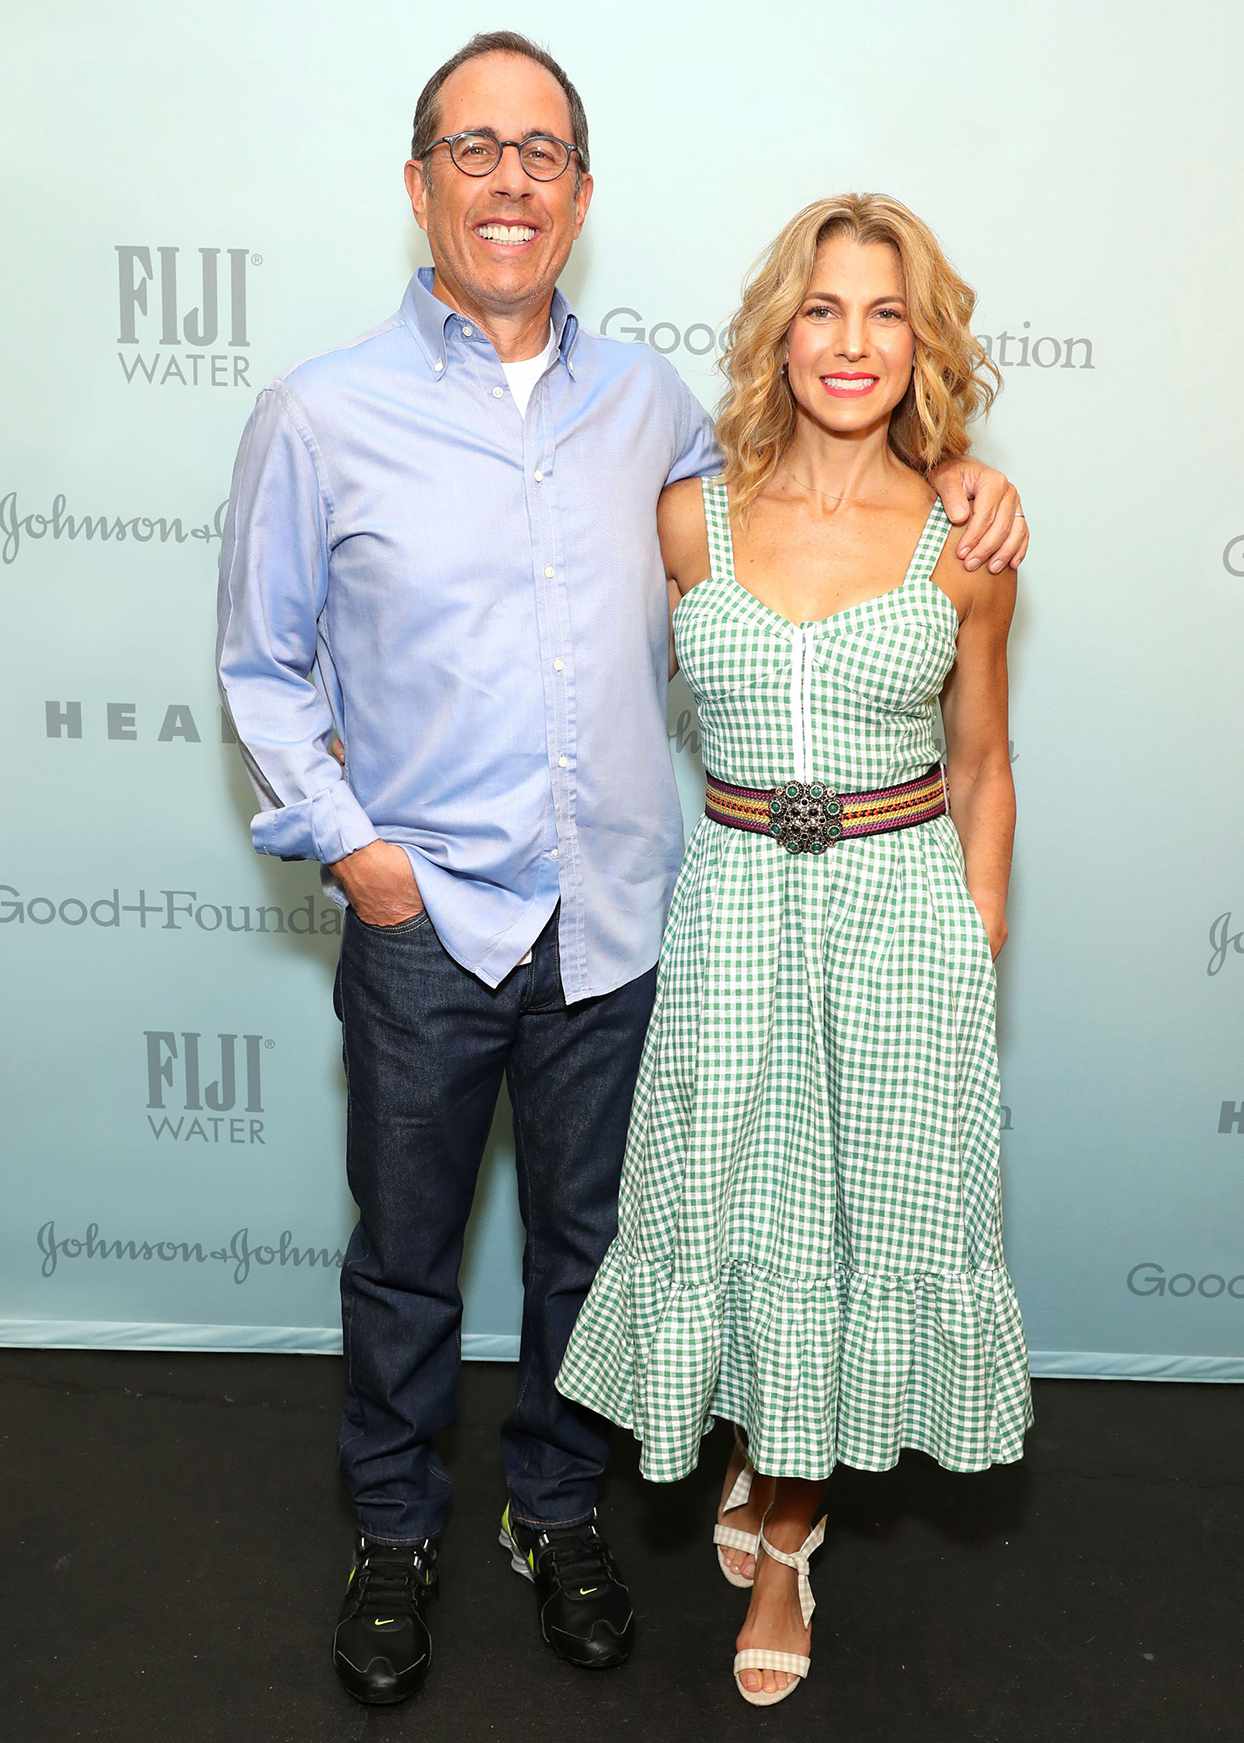 Jerry and Jessica Seinfeld standing at Good+Foundations Event